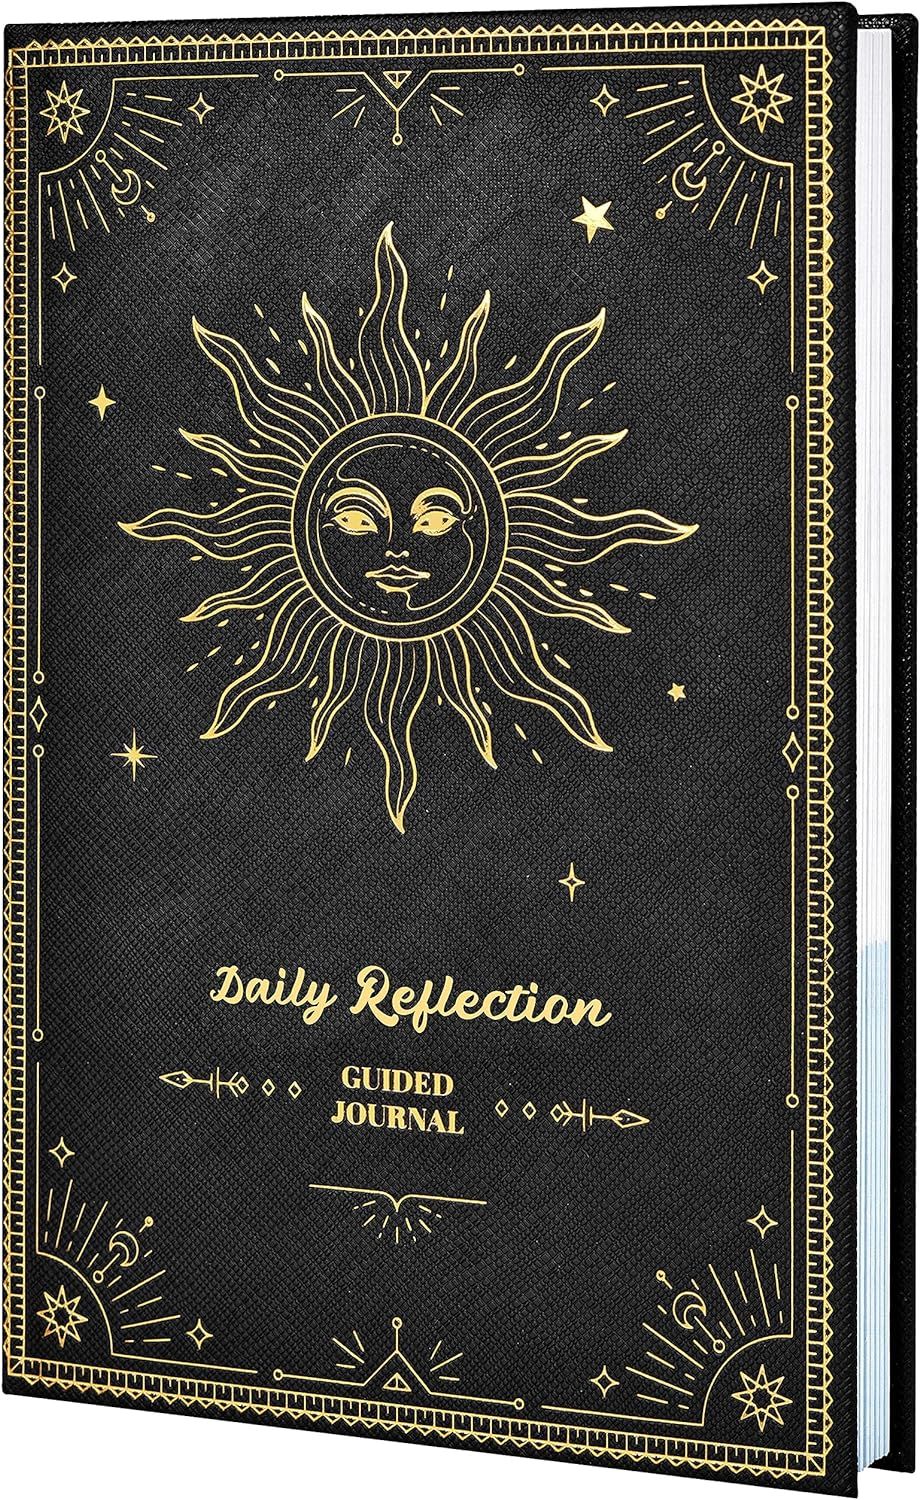 Daily Reflection Guided Journal by the Artfan Store